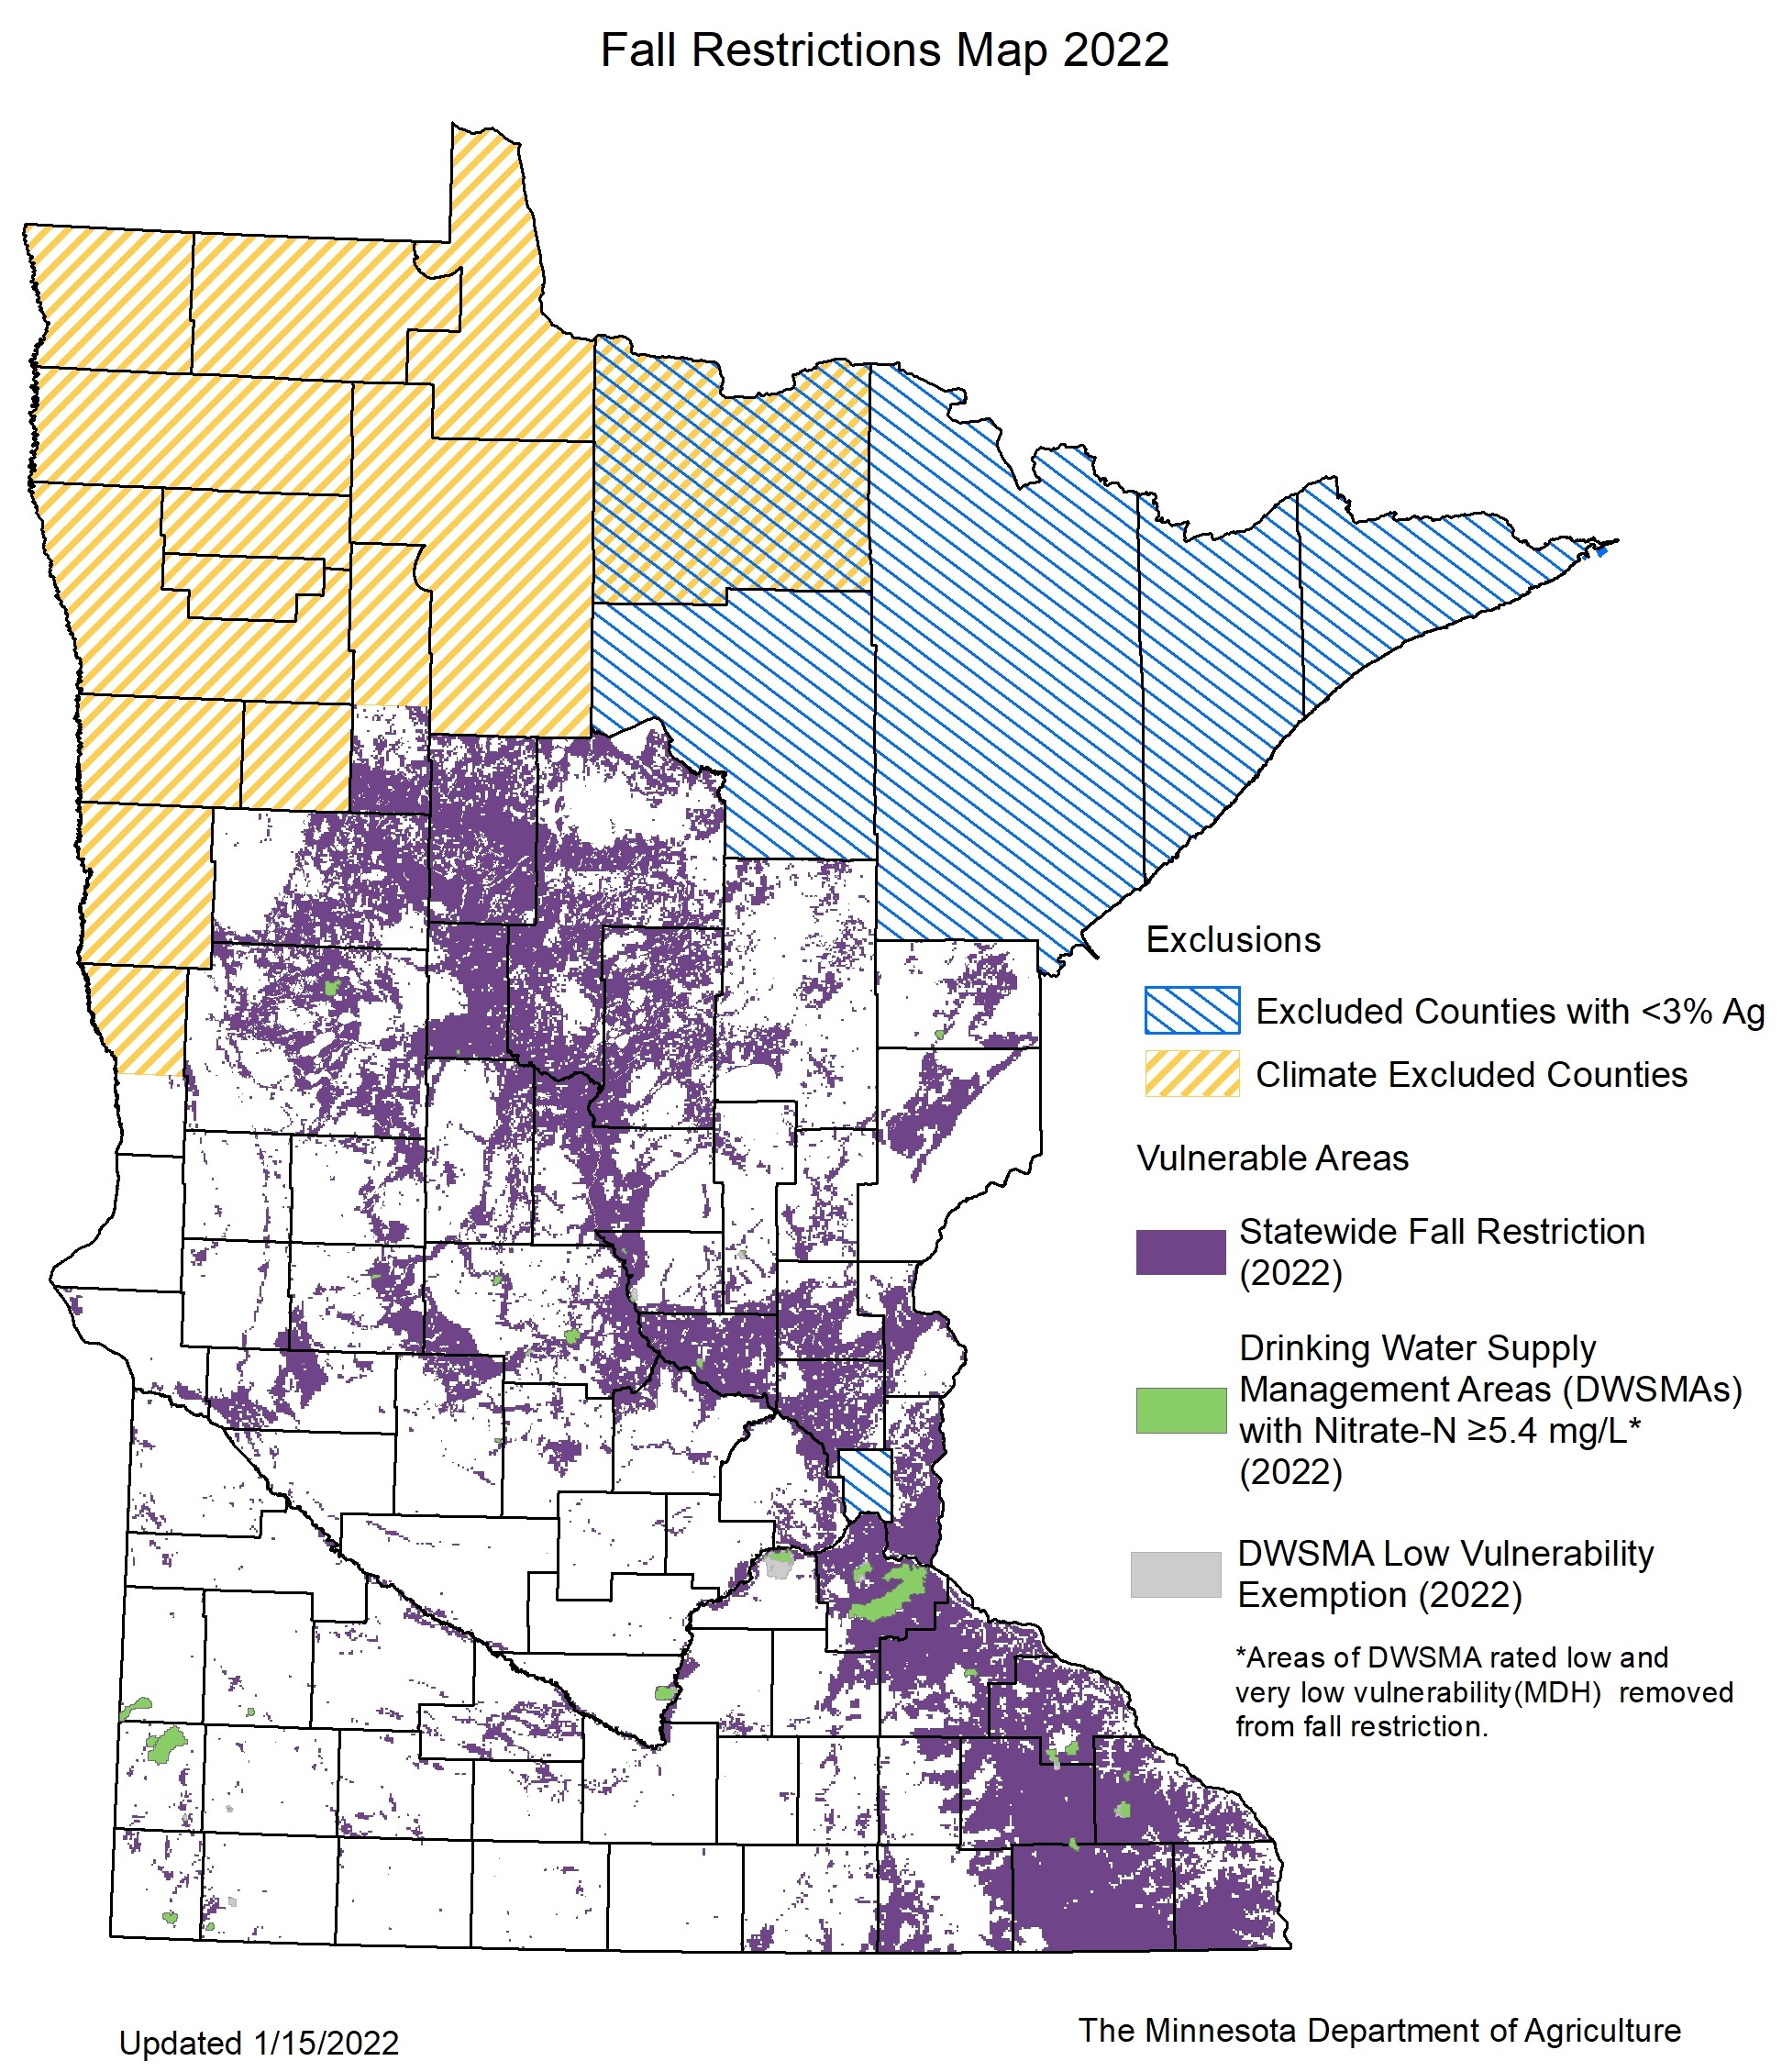 A map of the State of Minnesota illustrating the areas where the statewide fall restrictions and Drinking Water Supply Management Areas are located. For more information contact Larry.Gunderson@state.mn.us.